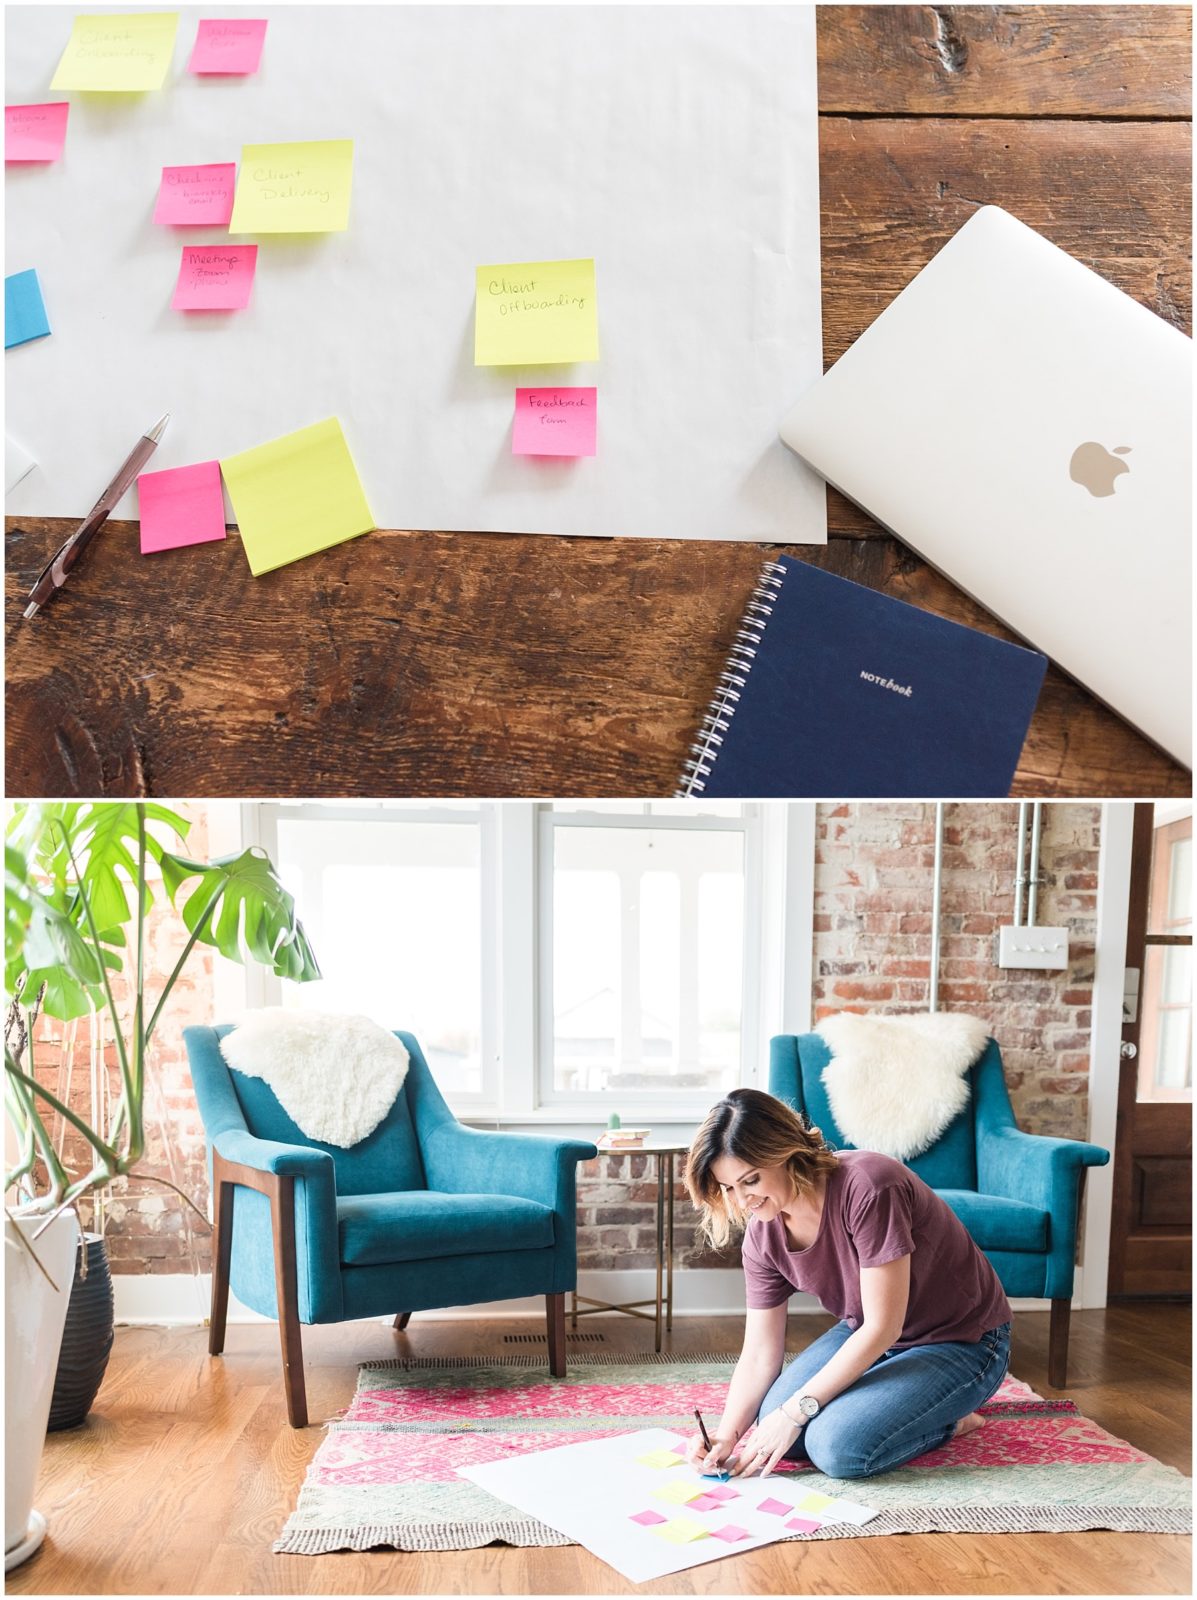 Woman business owner writing on post-it notes for a business photoshoot.